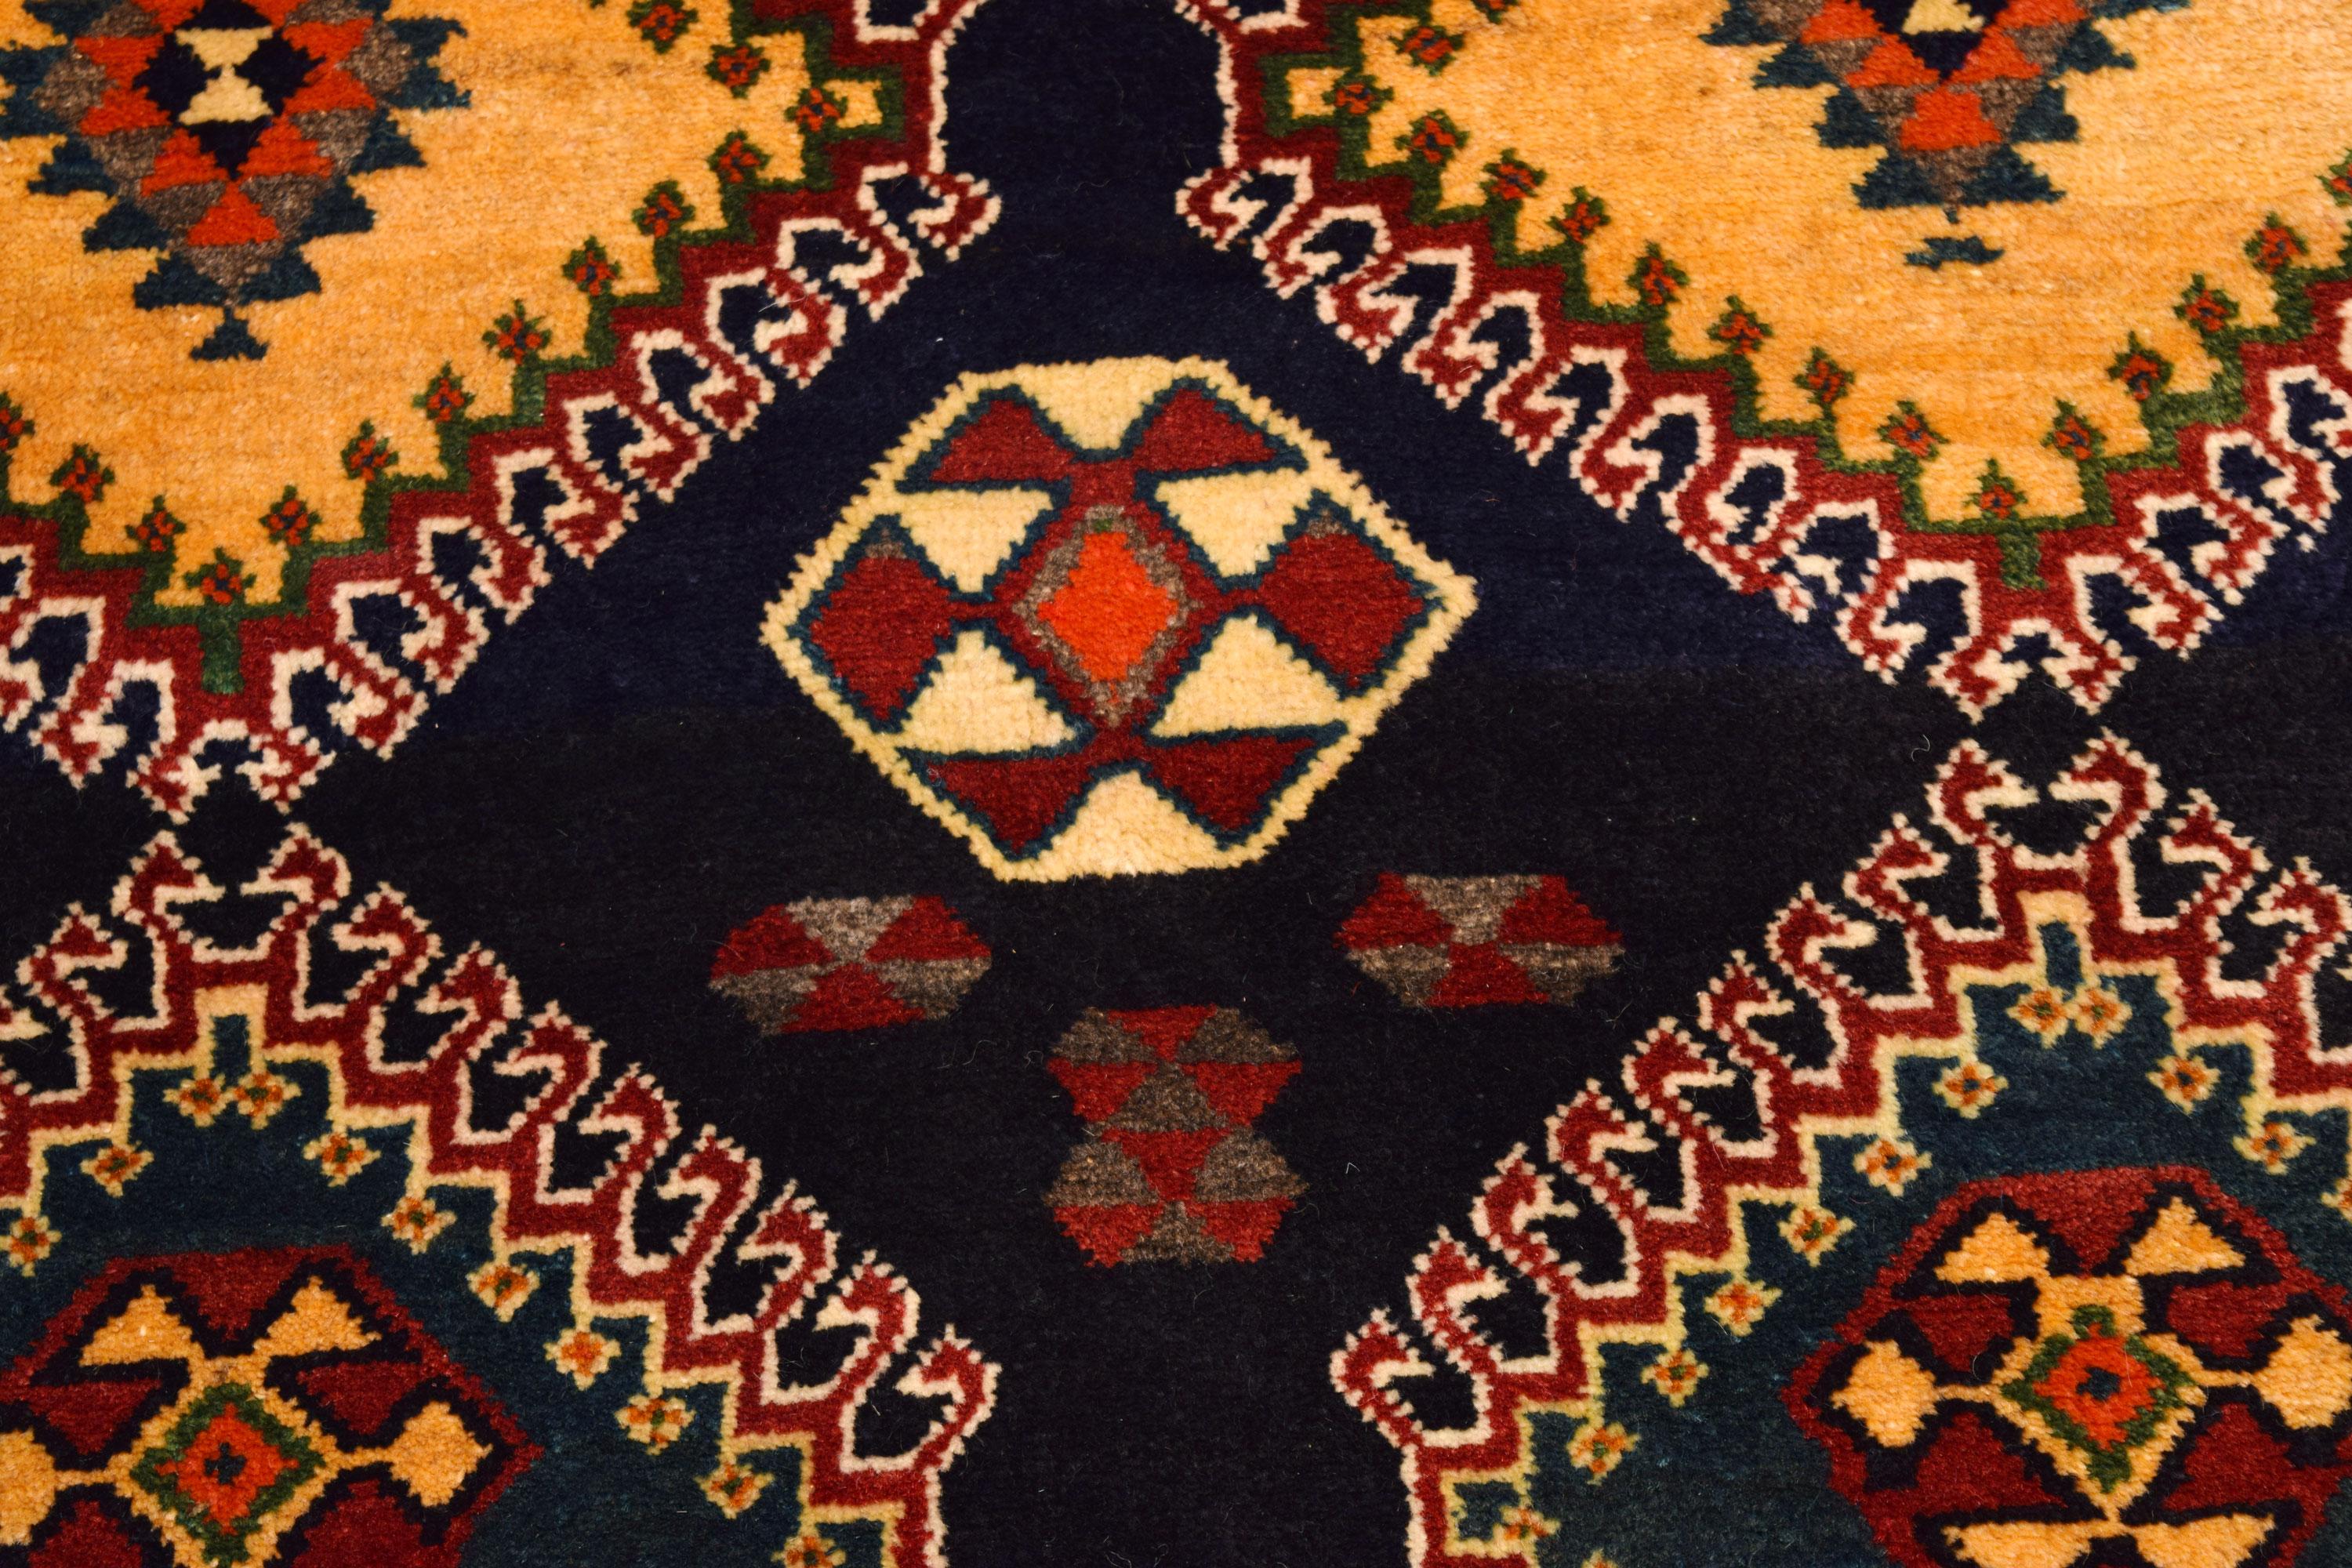 Vintage 1940s Wool Persian Qashqai Tribal Rug, Geometric, 4' x 6' In Excellent Condition For Sale In New York, NY